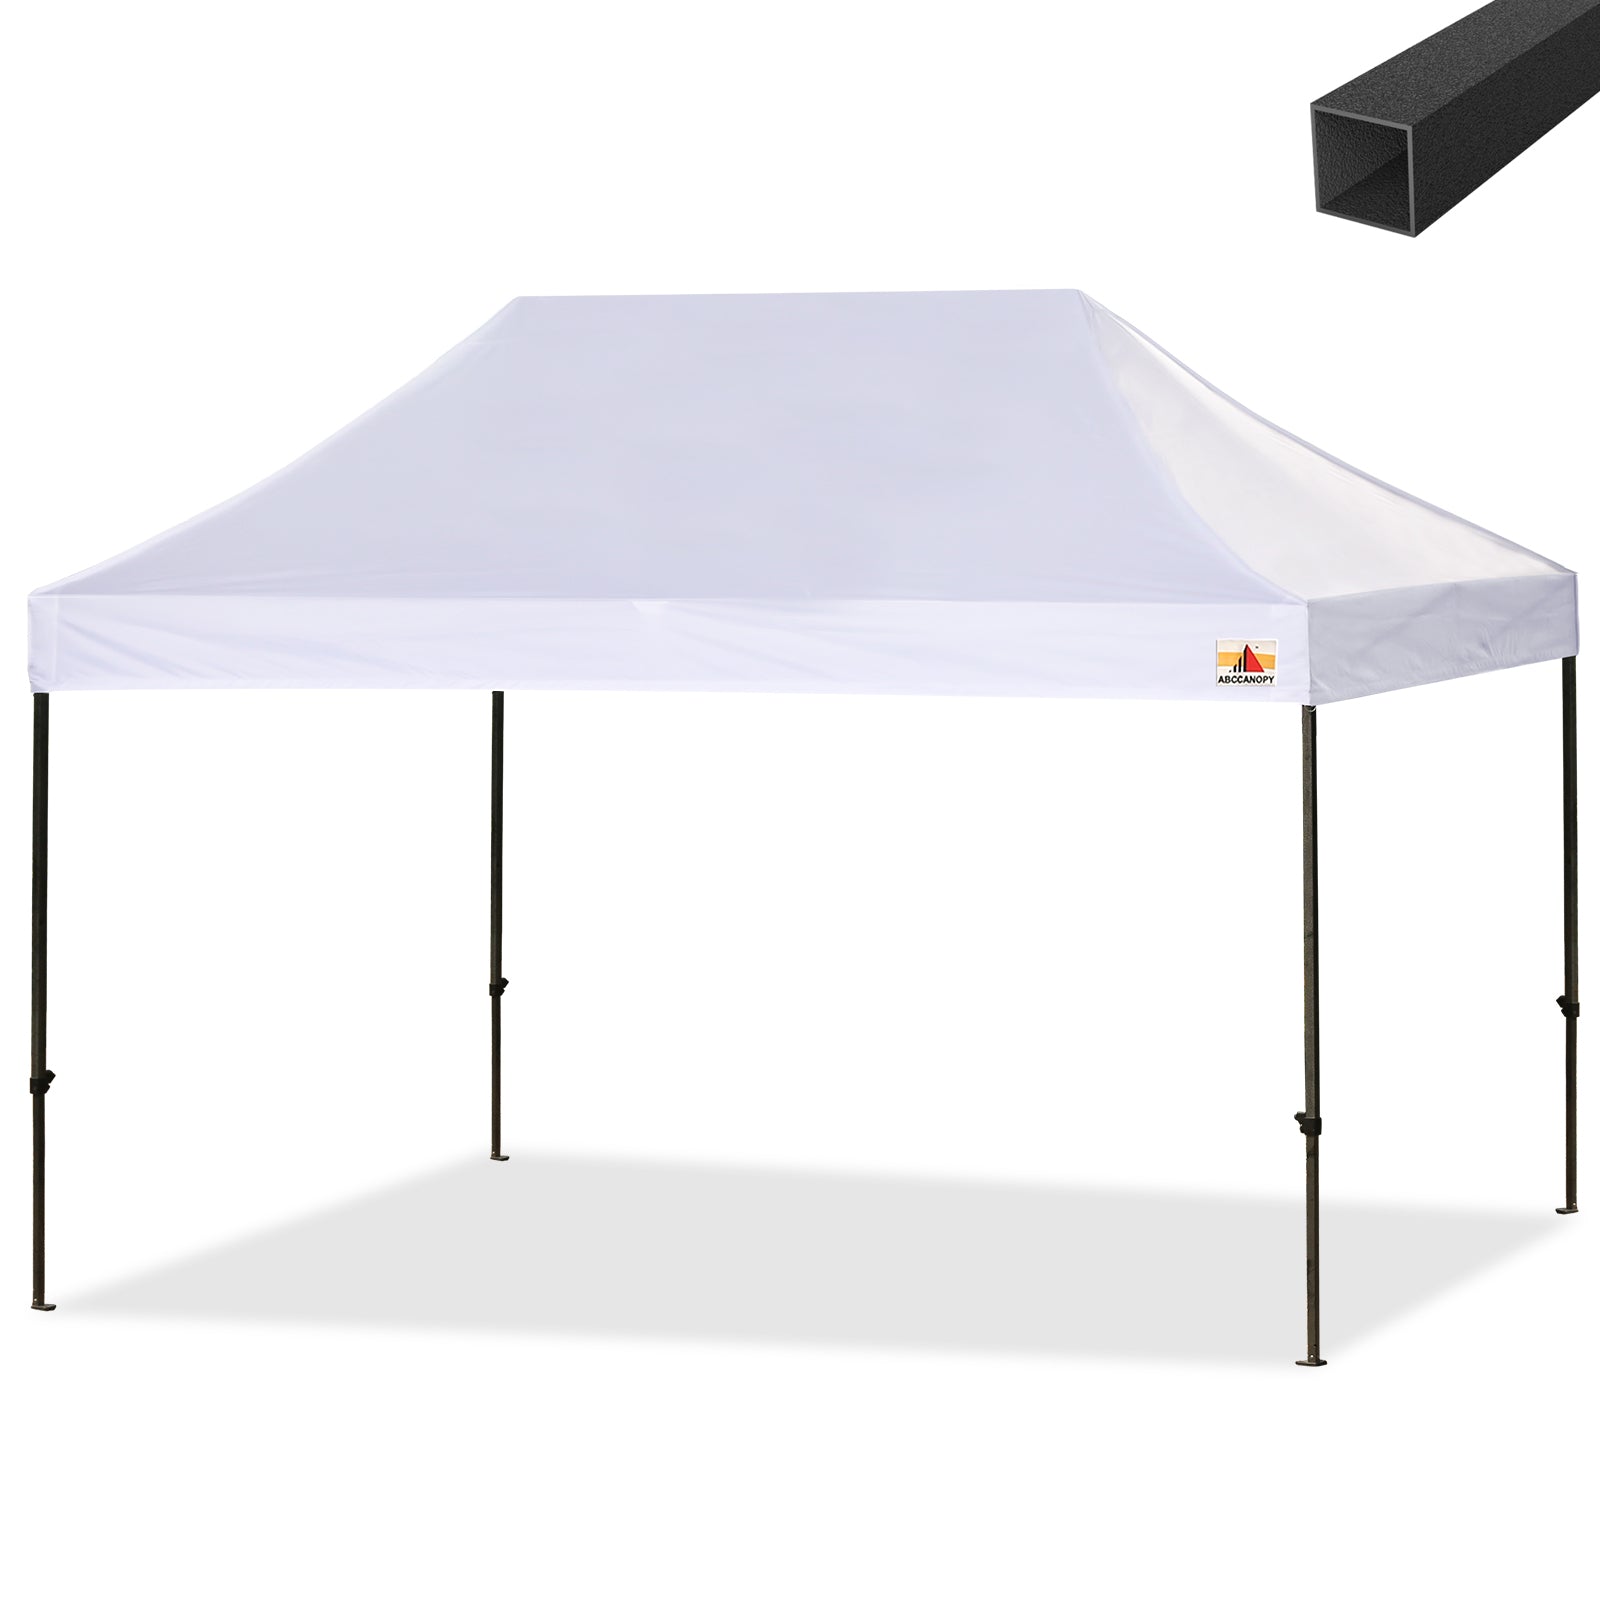 S1 Commercial 10x15 Canopy